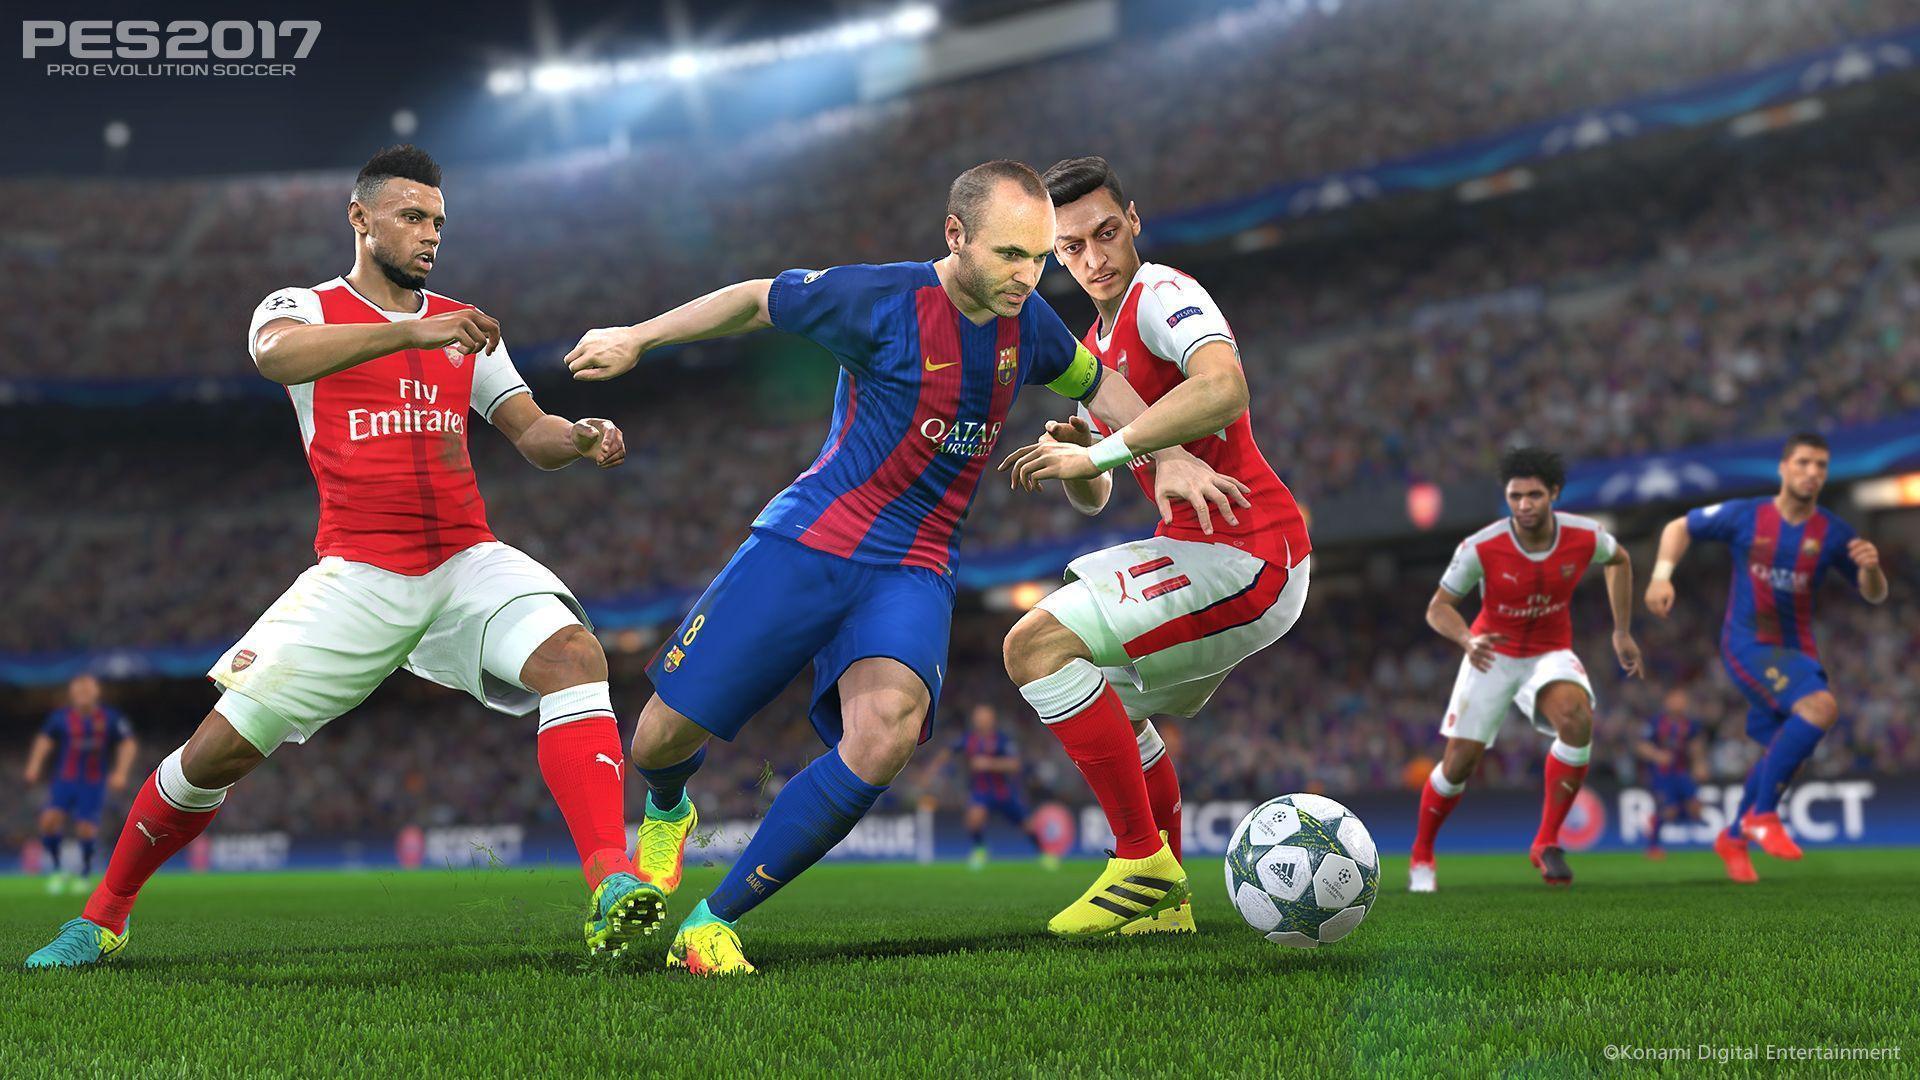 Camp Nou exclusivity and Barcelona cover stars confirmed for PES